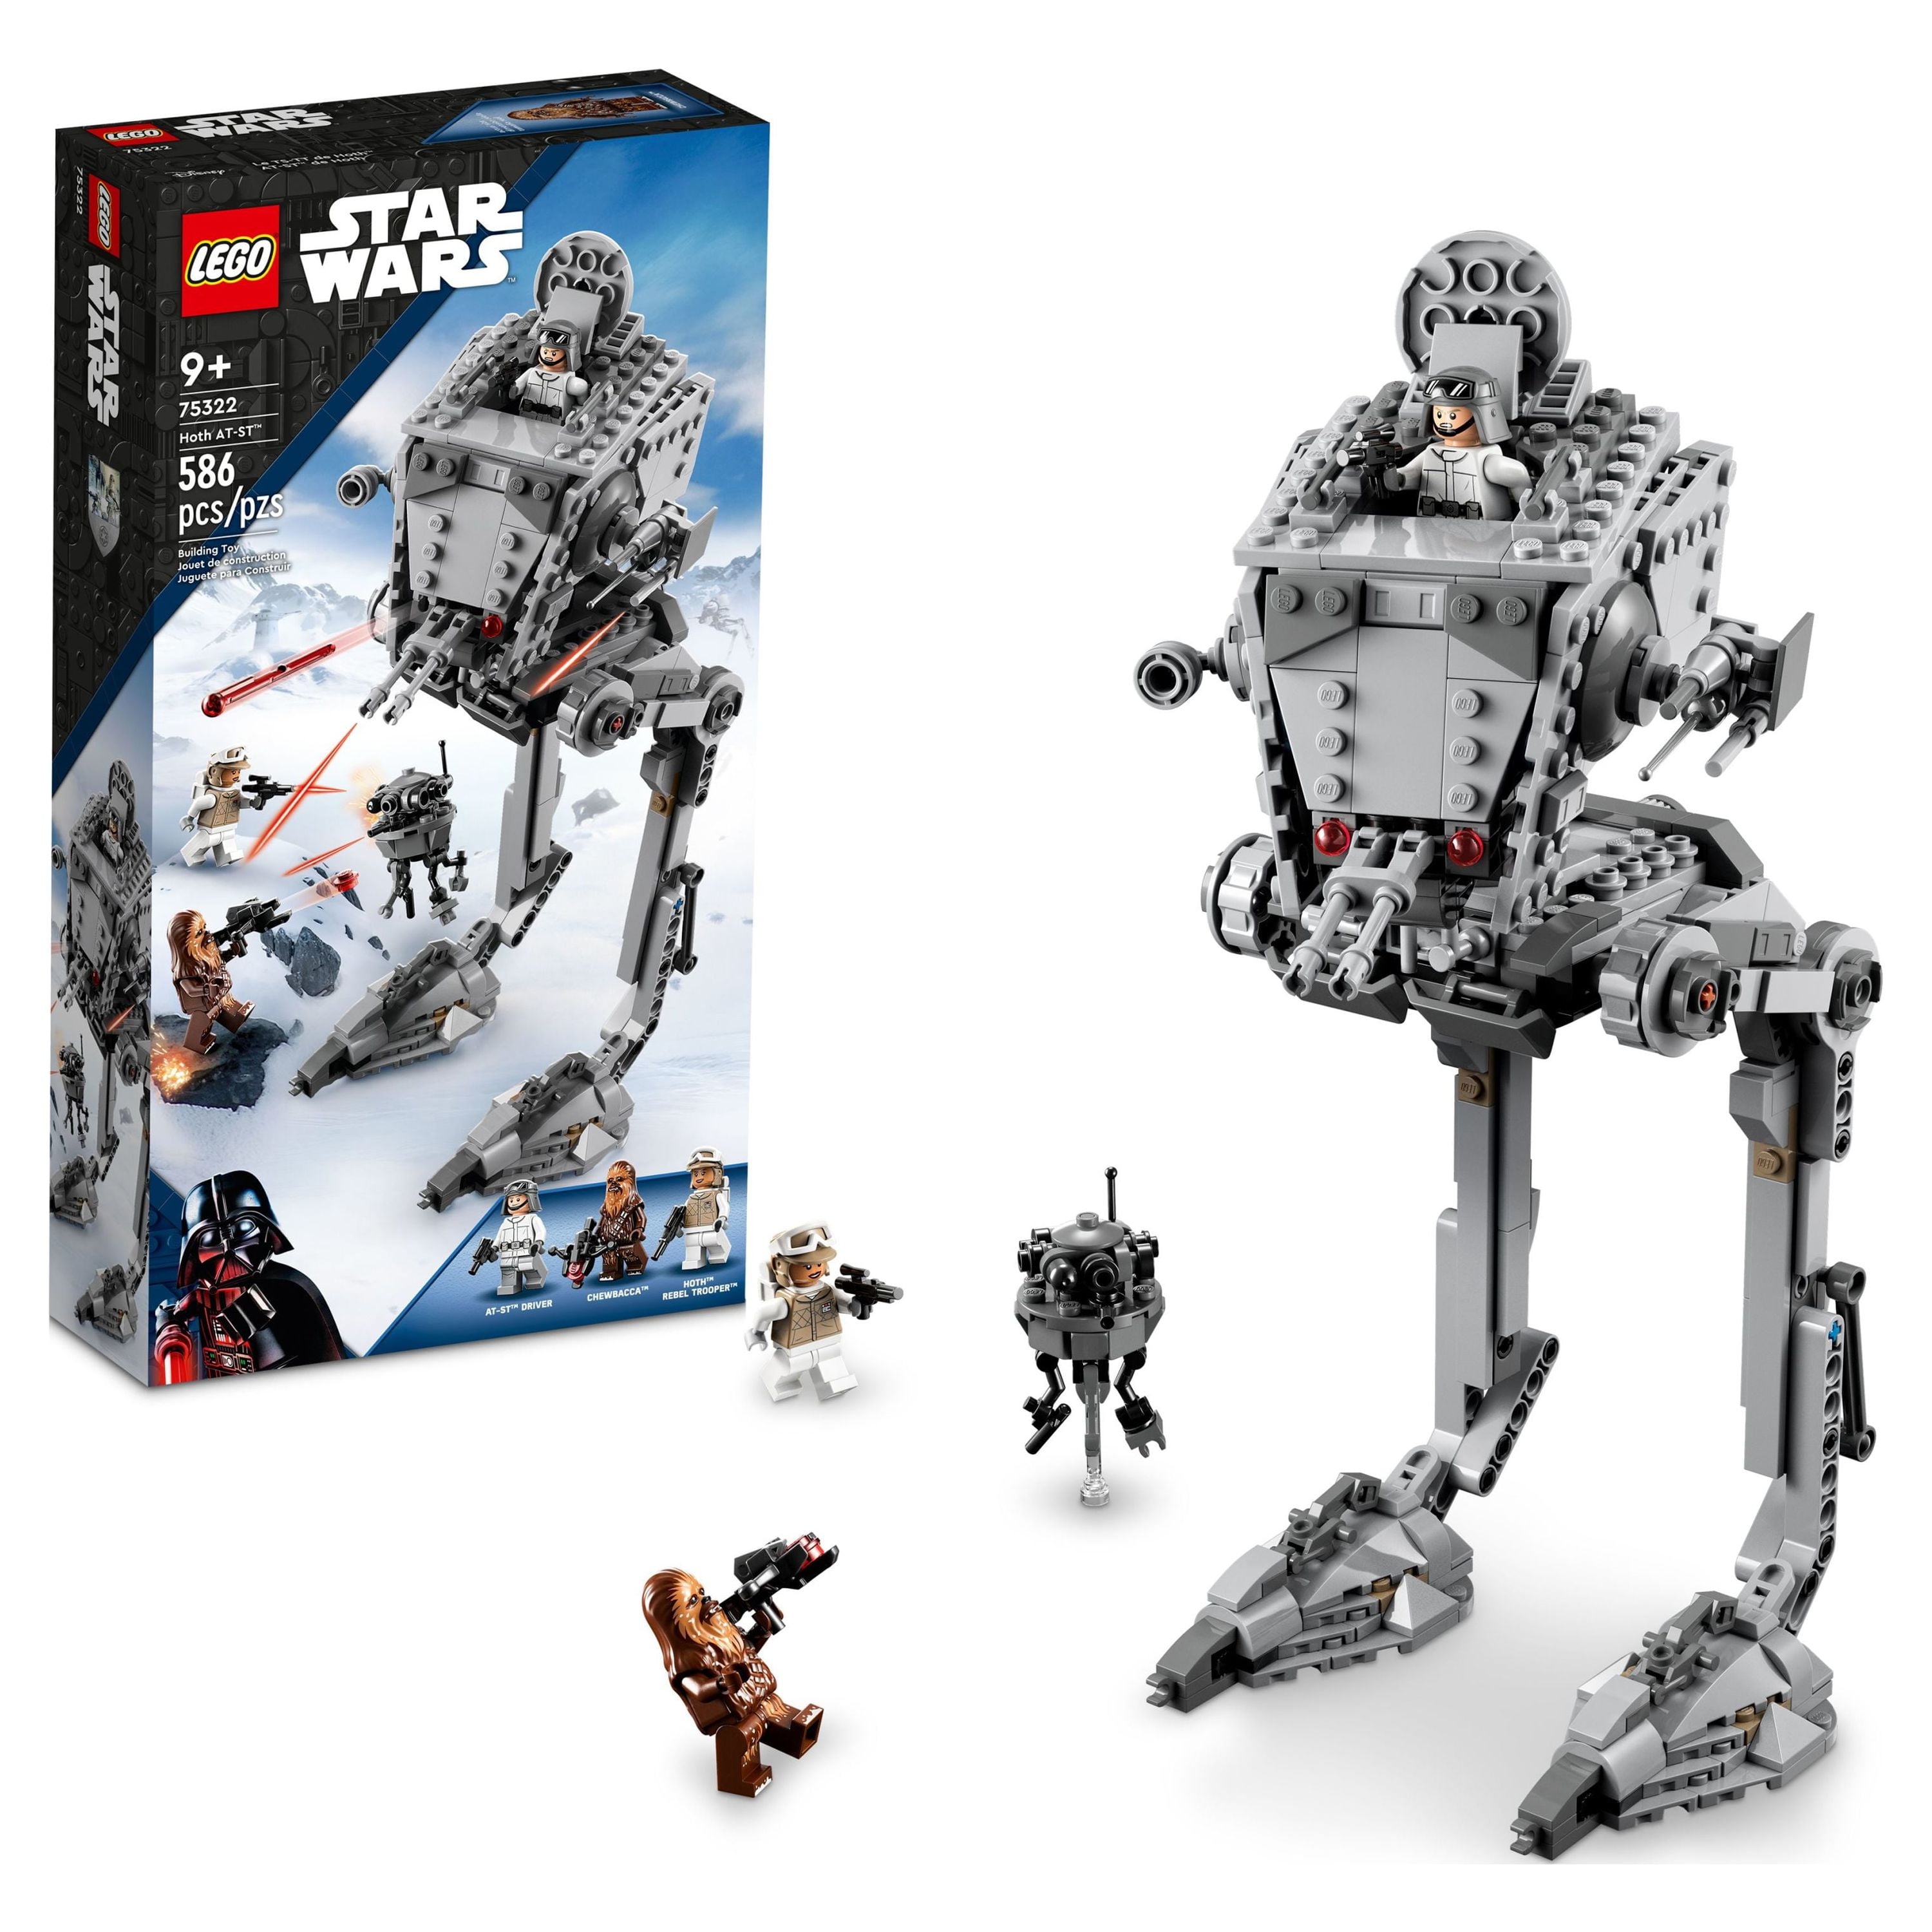  LEGO Star Wars Hoth at-ST Walker 75322 Building Toy for Kids  with Chewbacca Minifigure and Droid Figure, The Empire Strikes Back Model :  Toys & Games